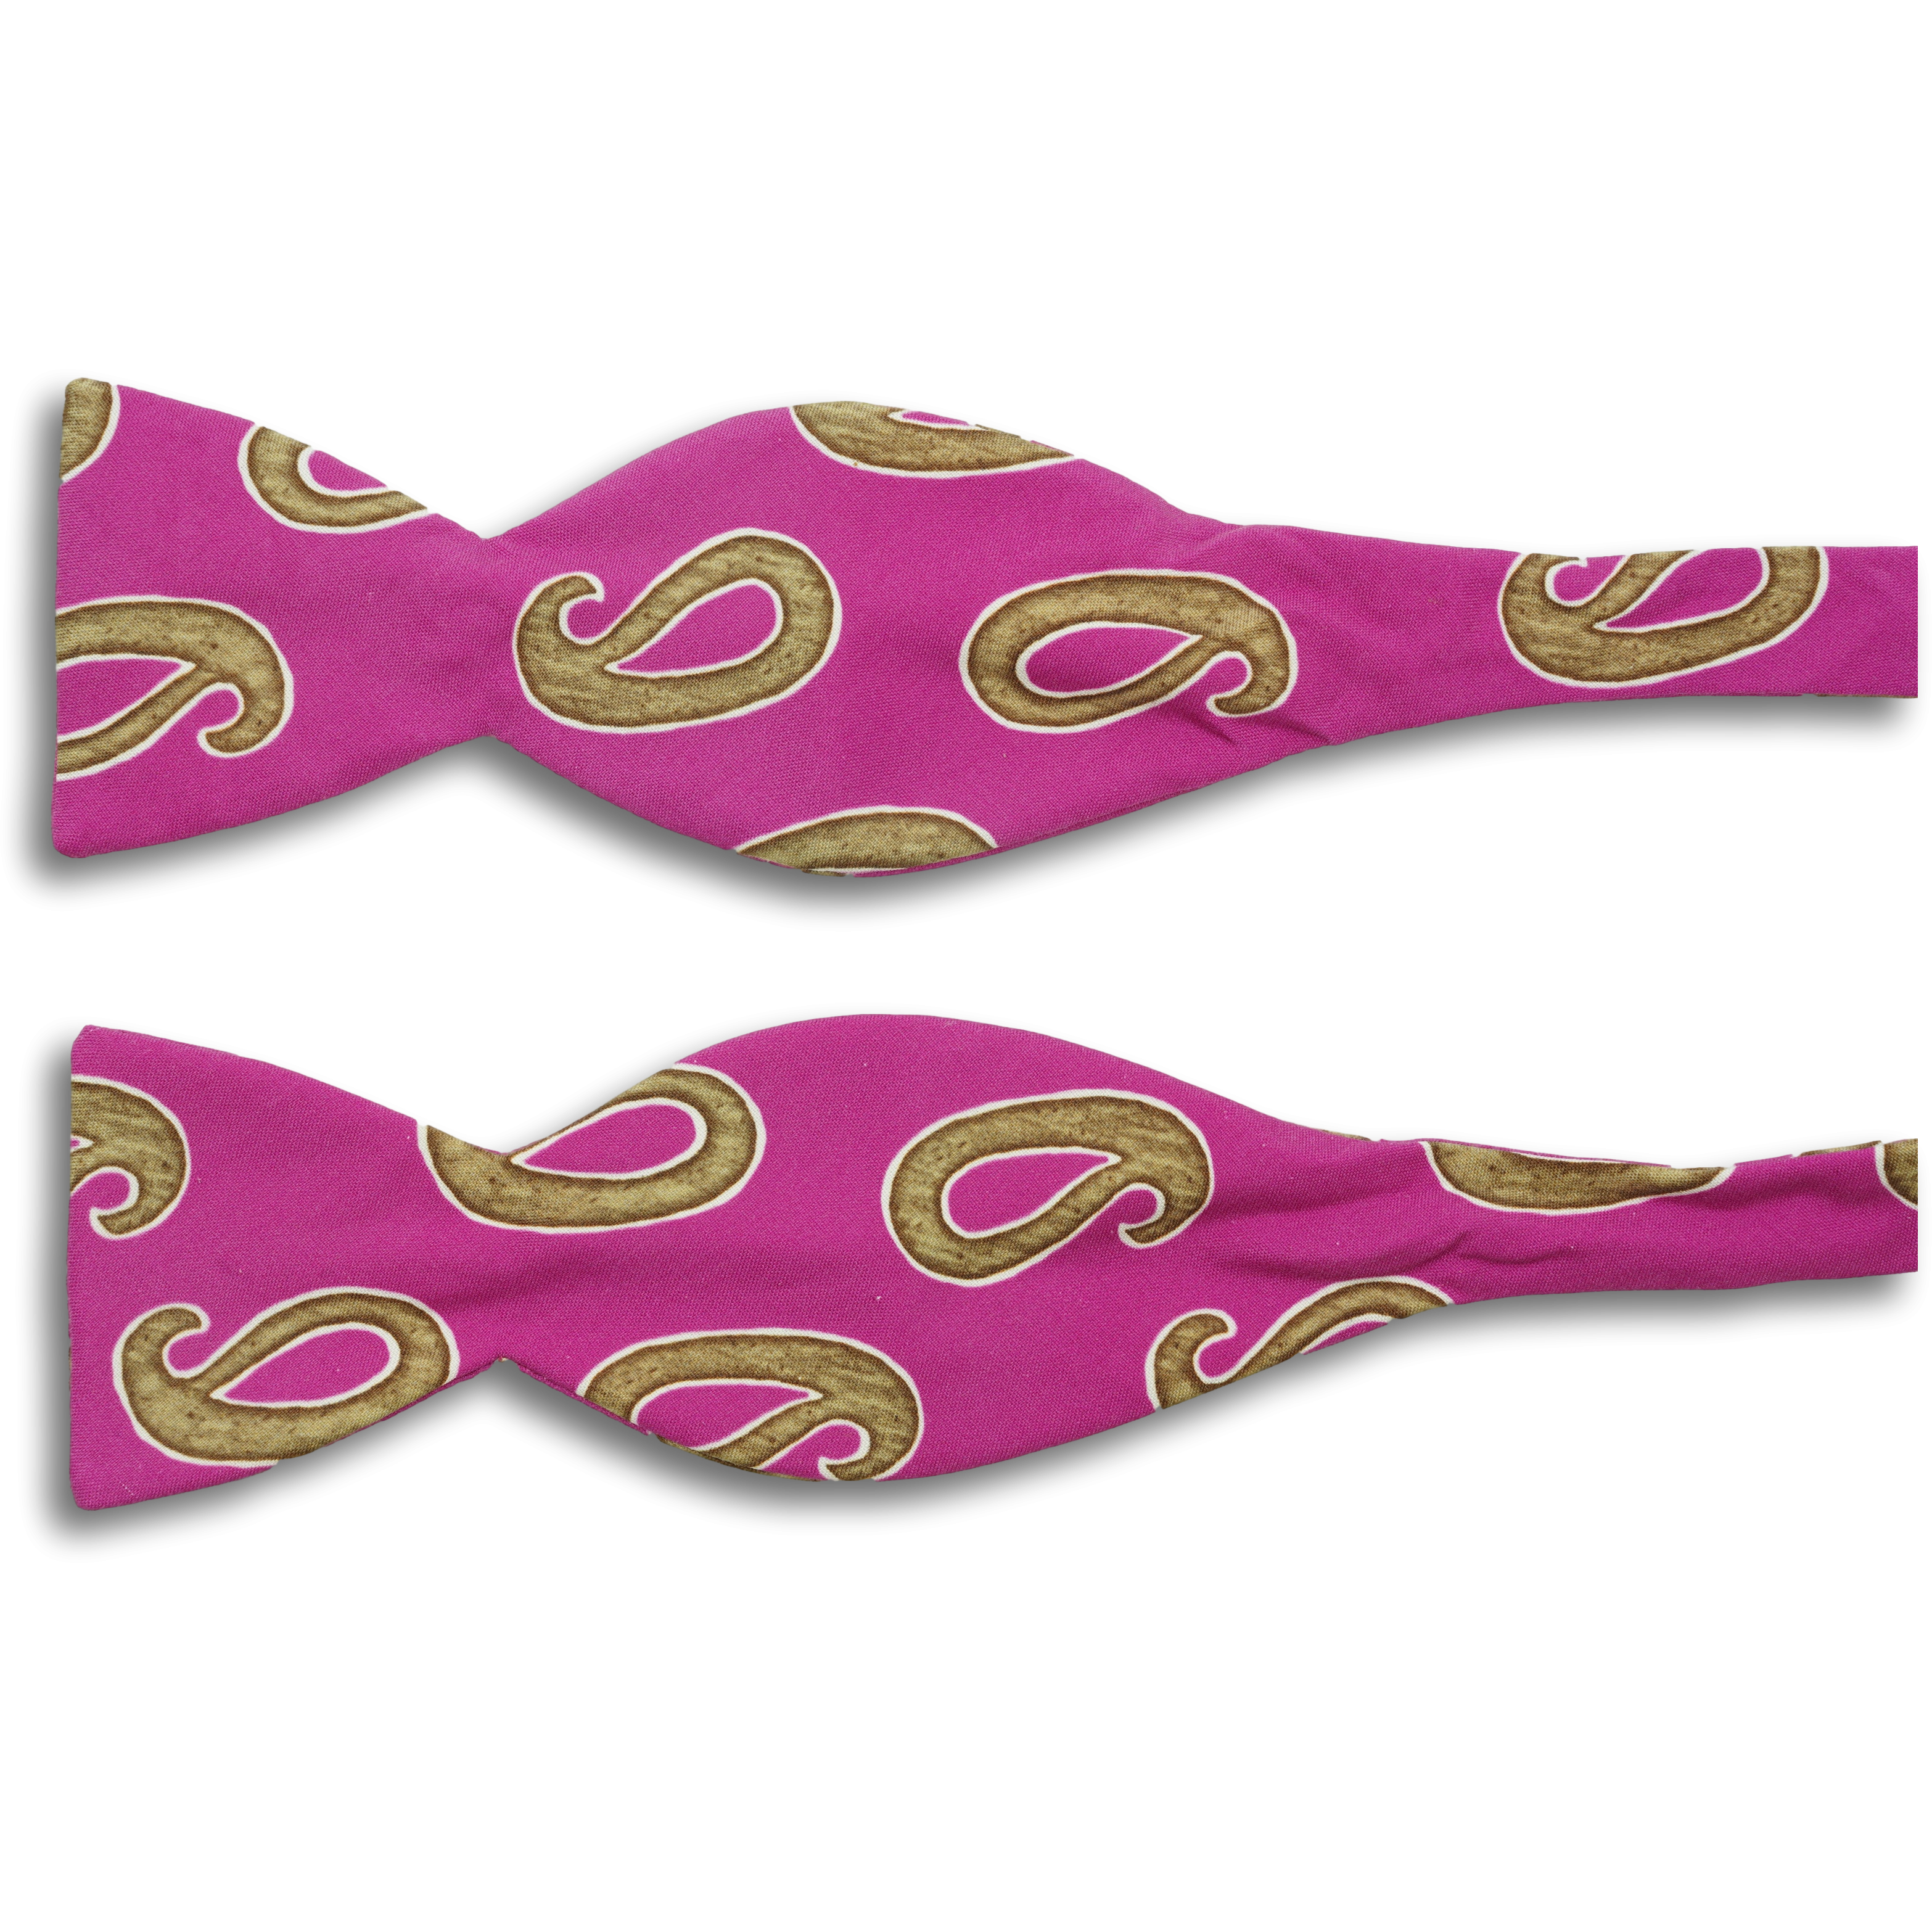 Large Paisley Print Motif Silk Butterfly Bow Tie